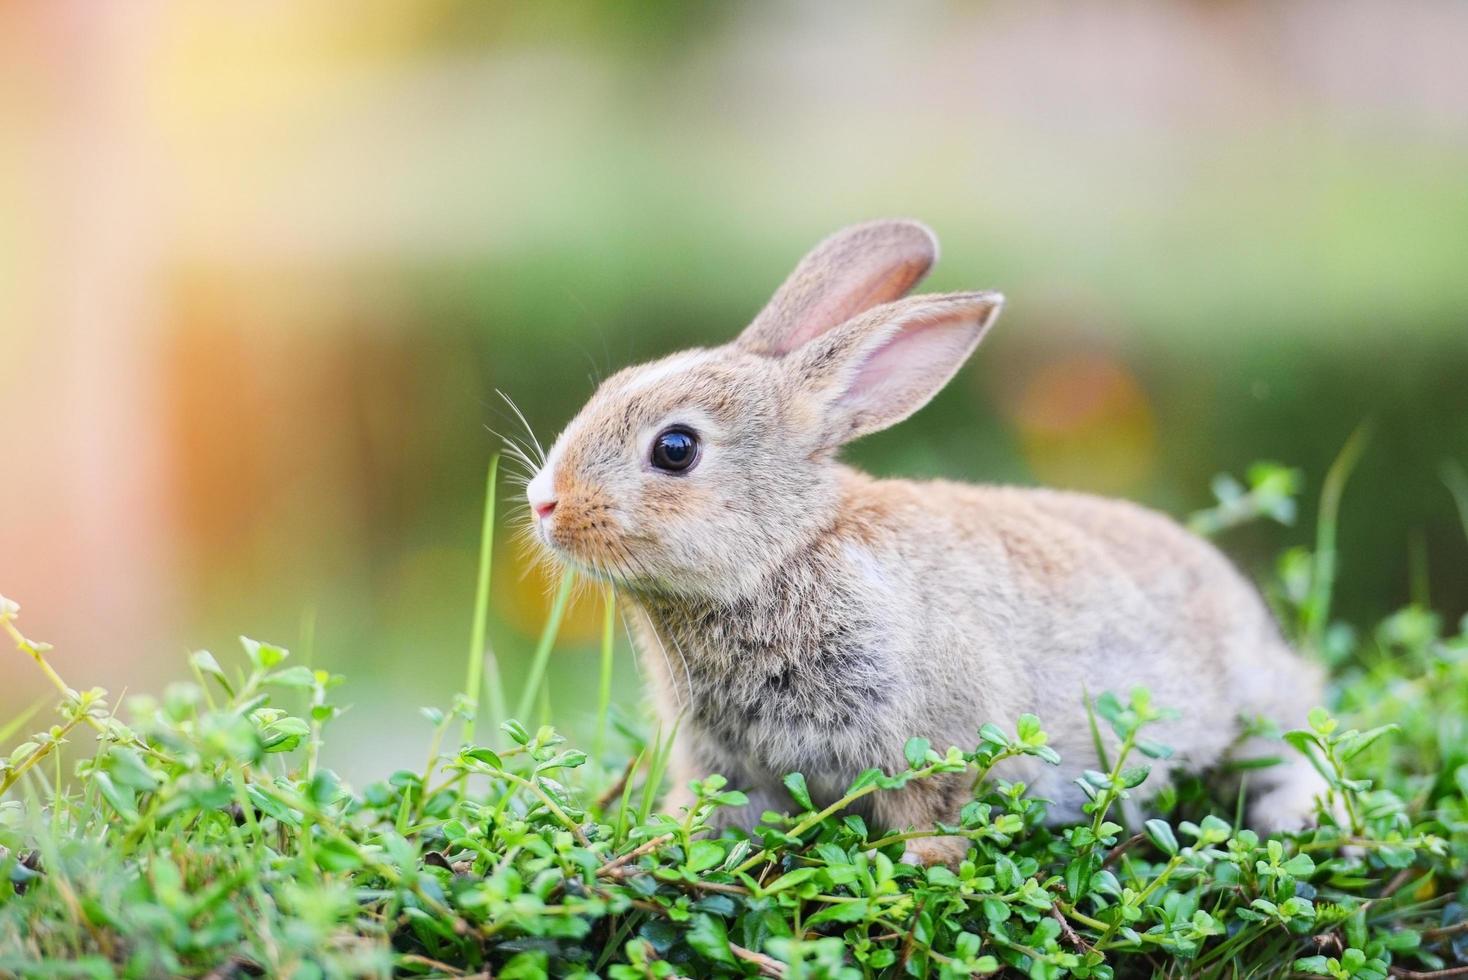 The bunny brown rabbit on green grass - rabbit easter concept photo